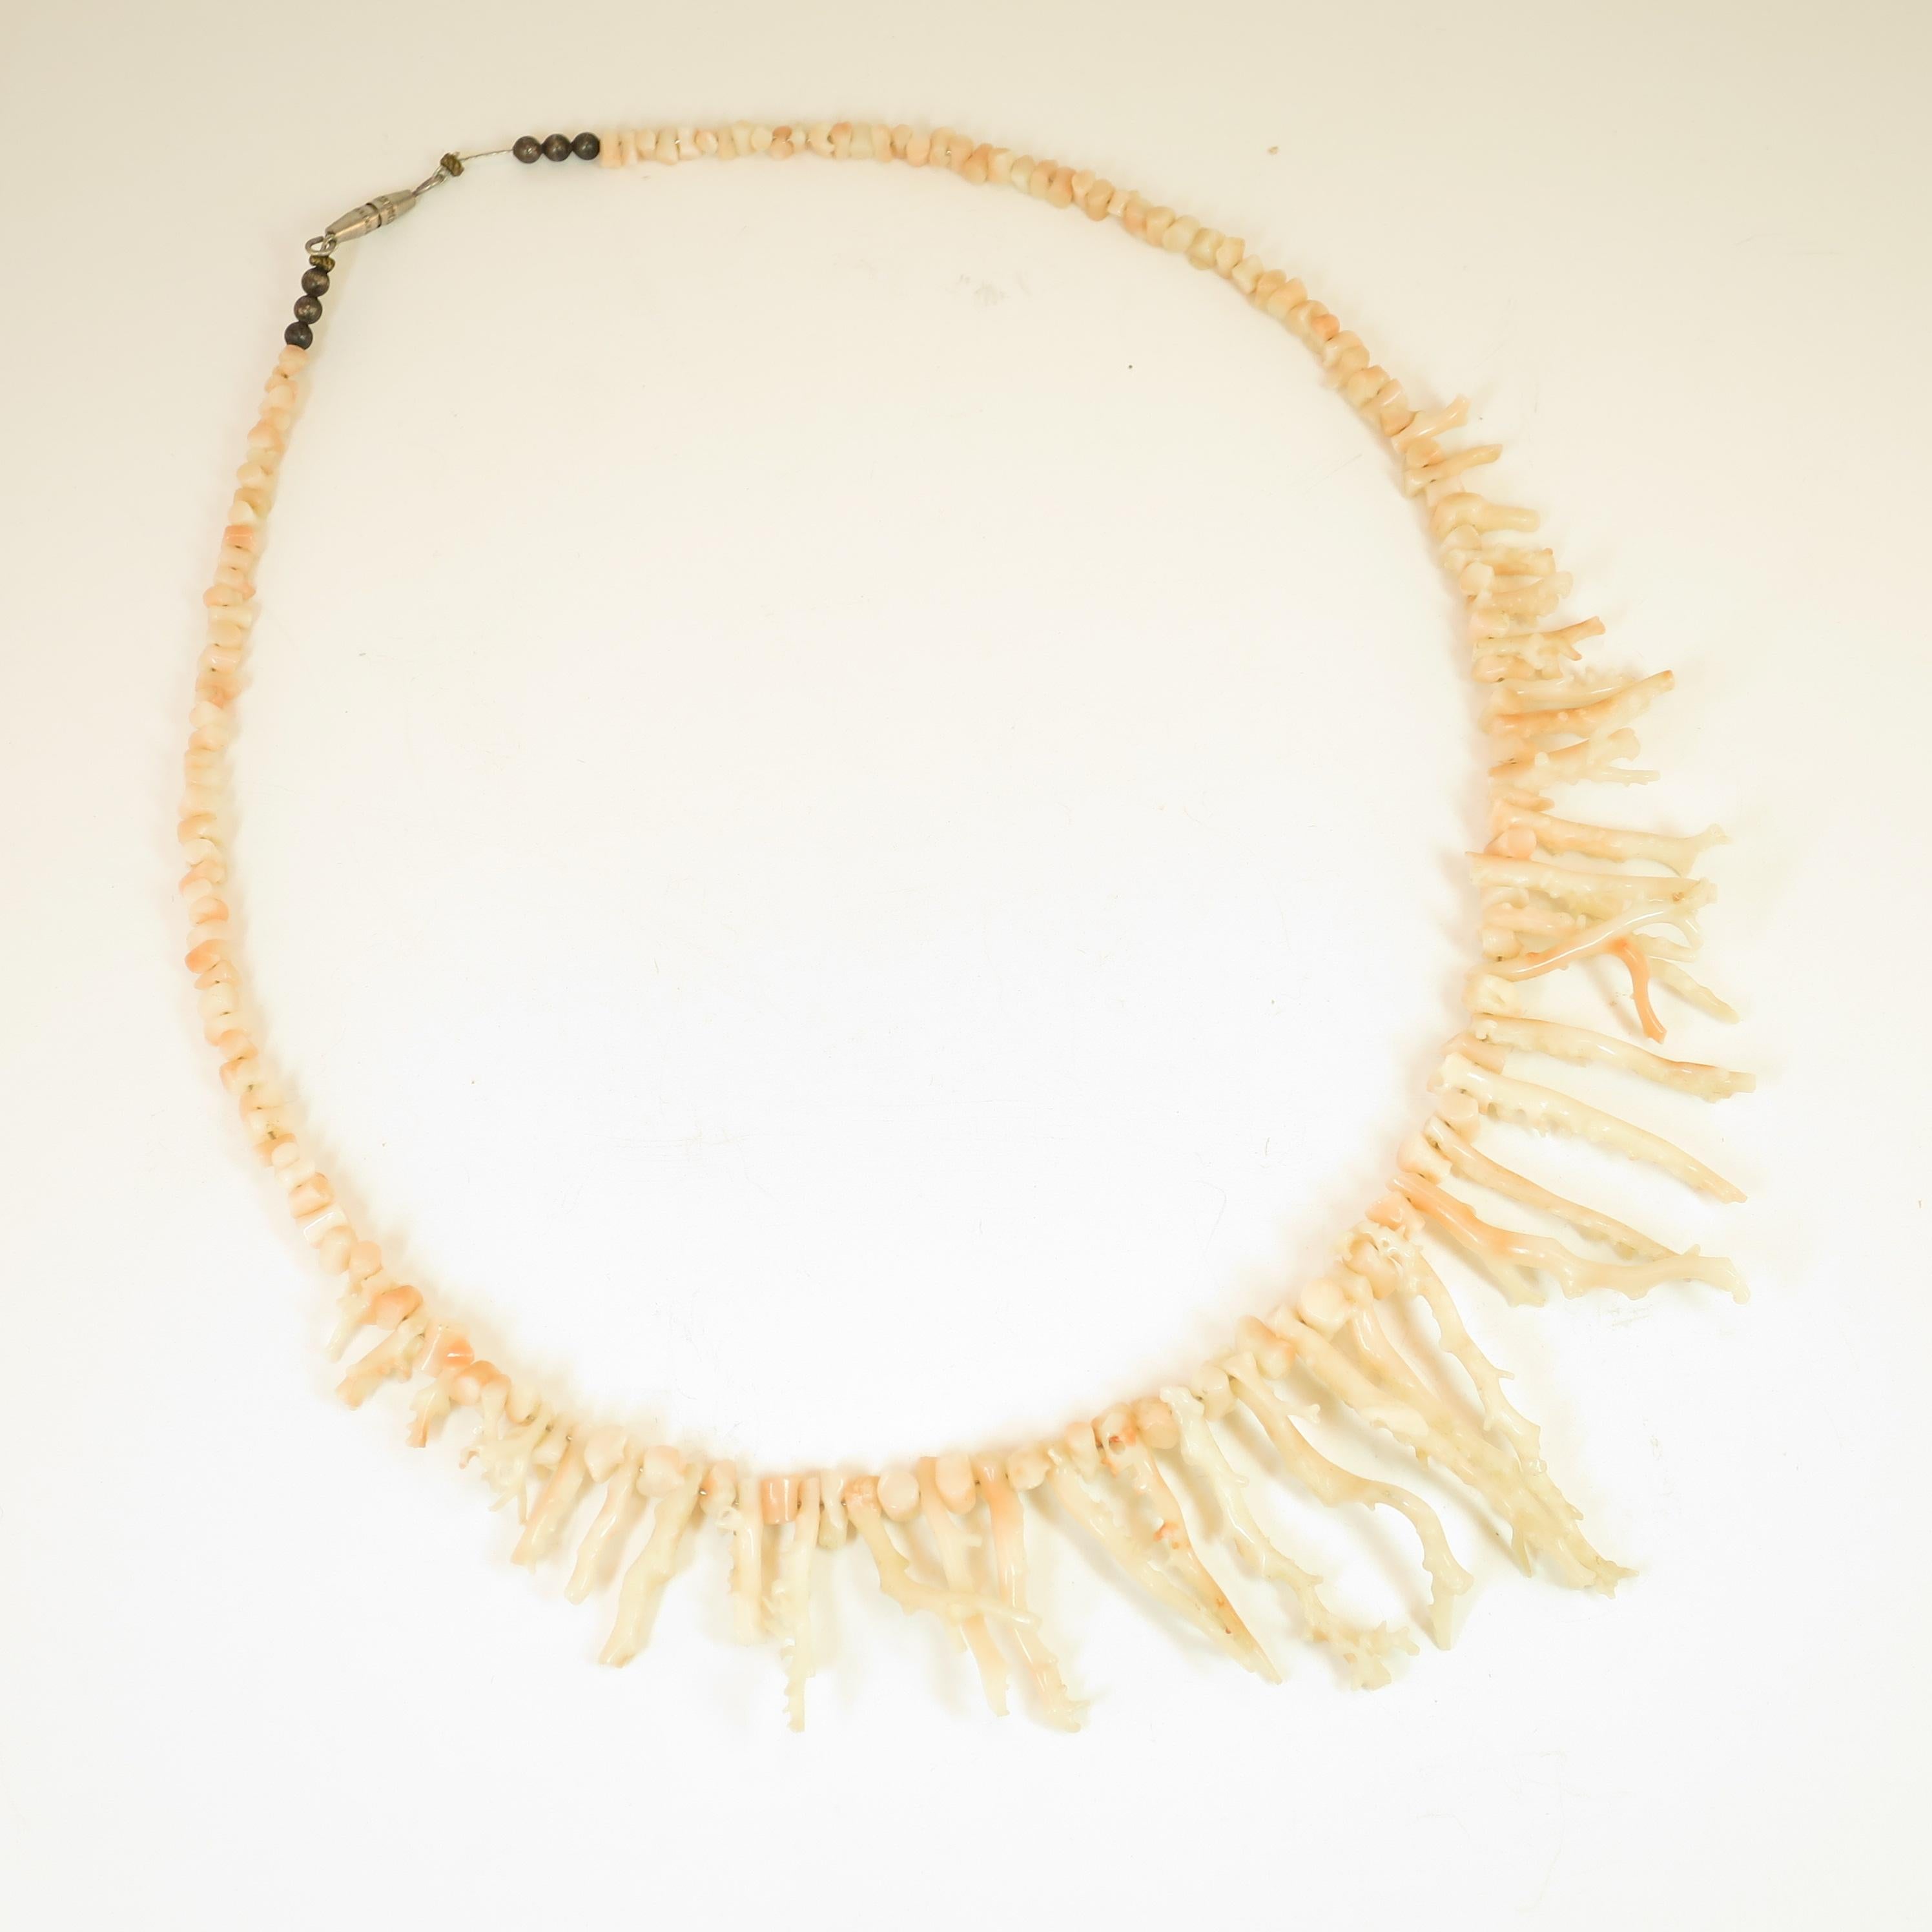 Offered here is an angel skin branch coral necklace from the 1930s. Graduated angel-skin coral branches and nuggets in a delicate hue of cream blushed with pale pink are strung on secure fine wire, finished with tiny metal beads and a narrow barrel